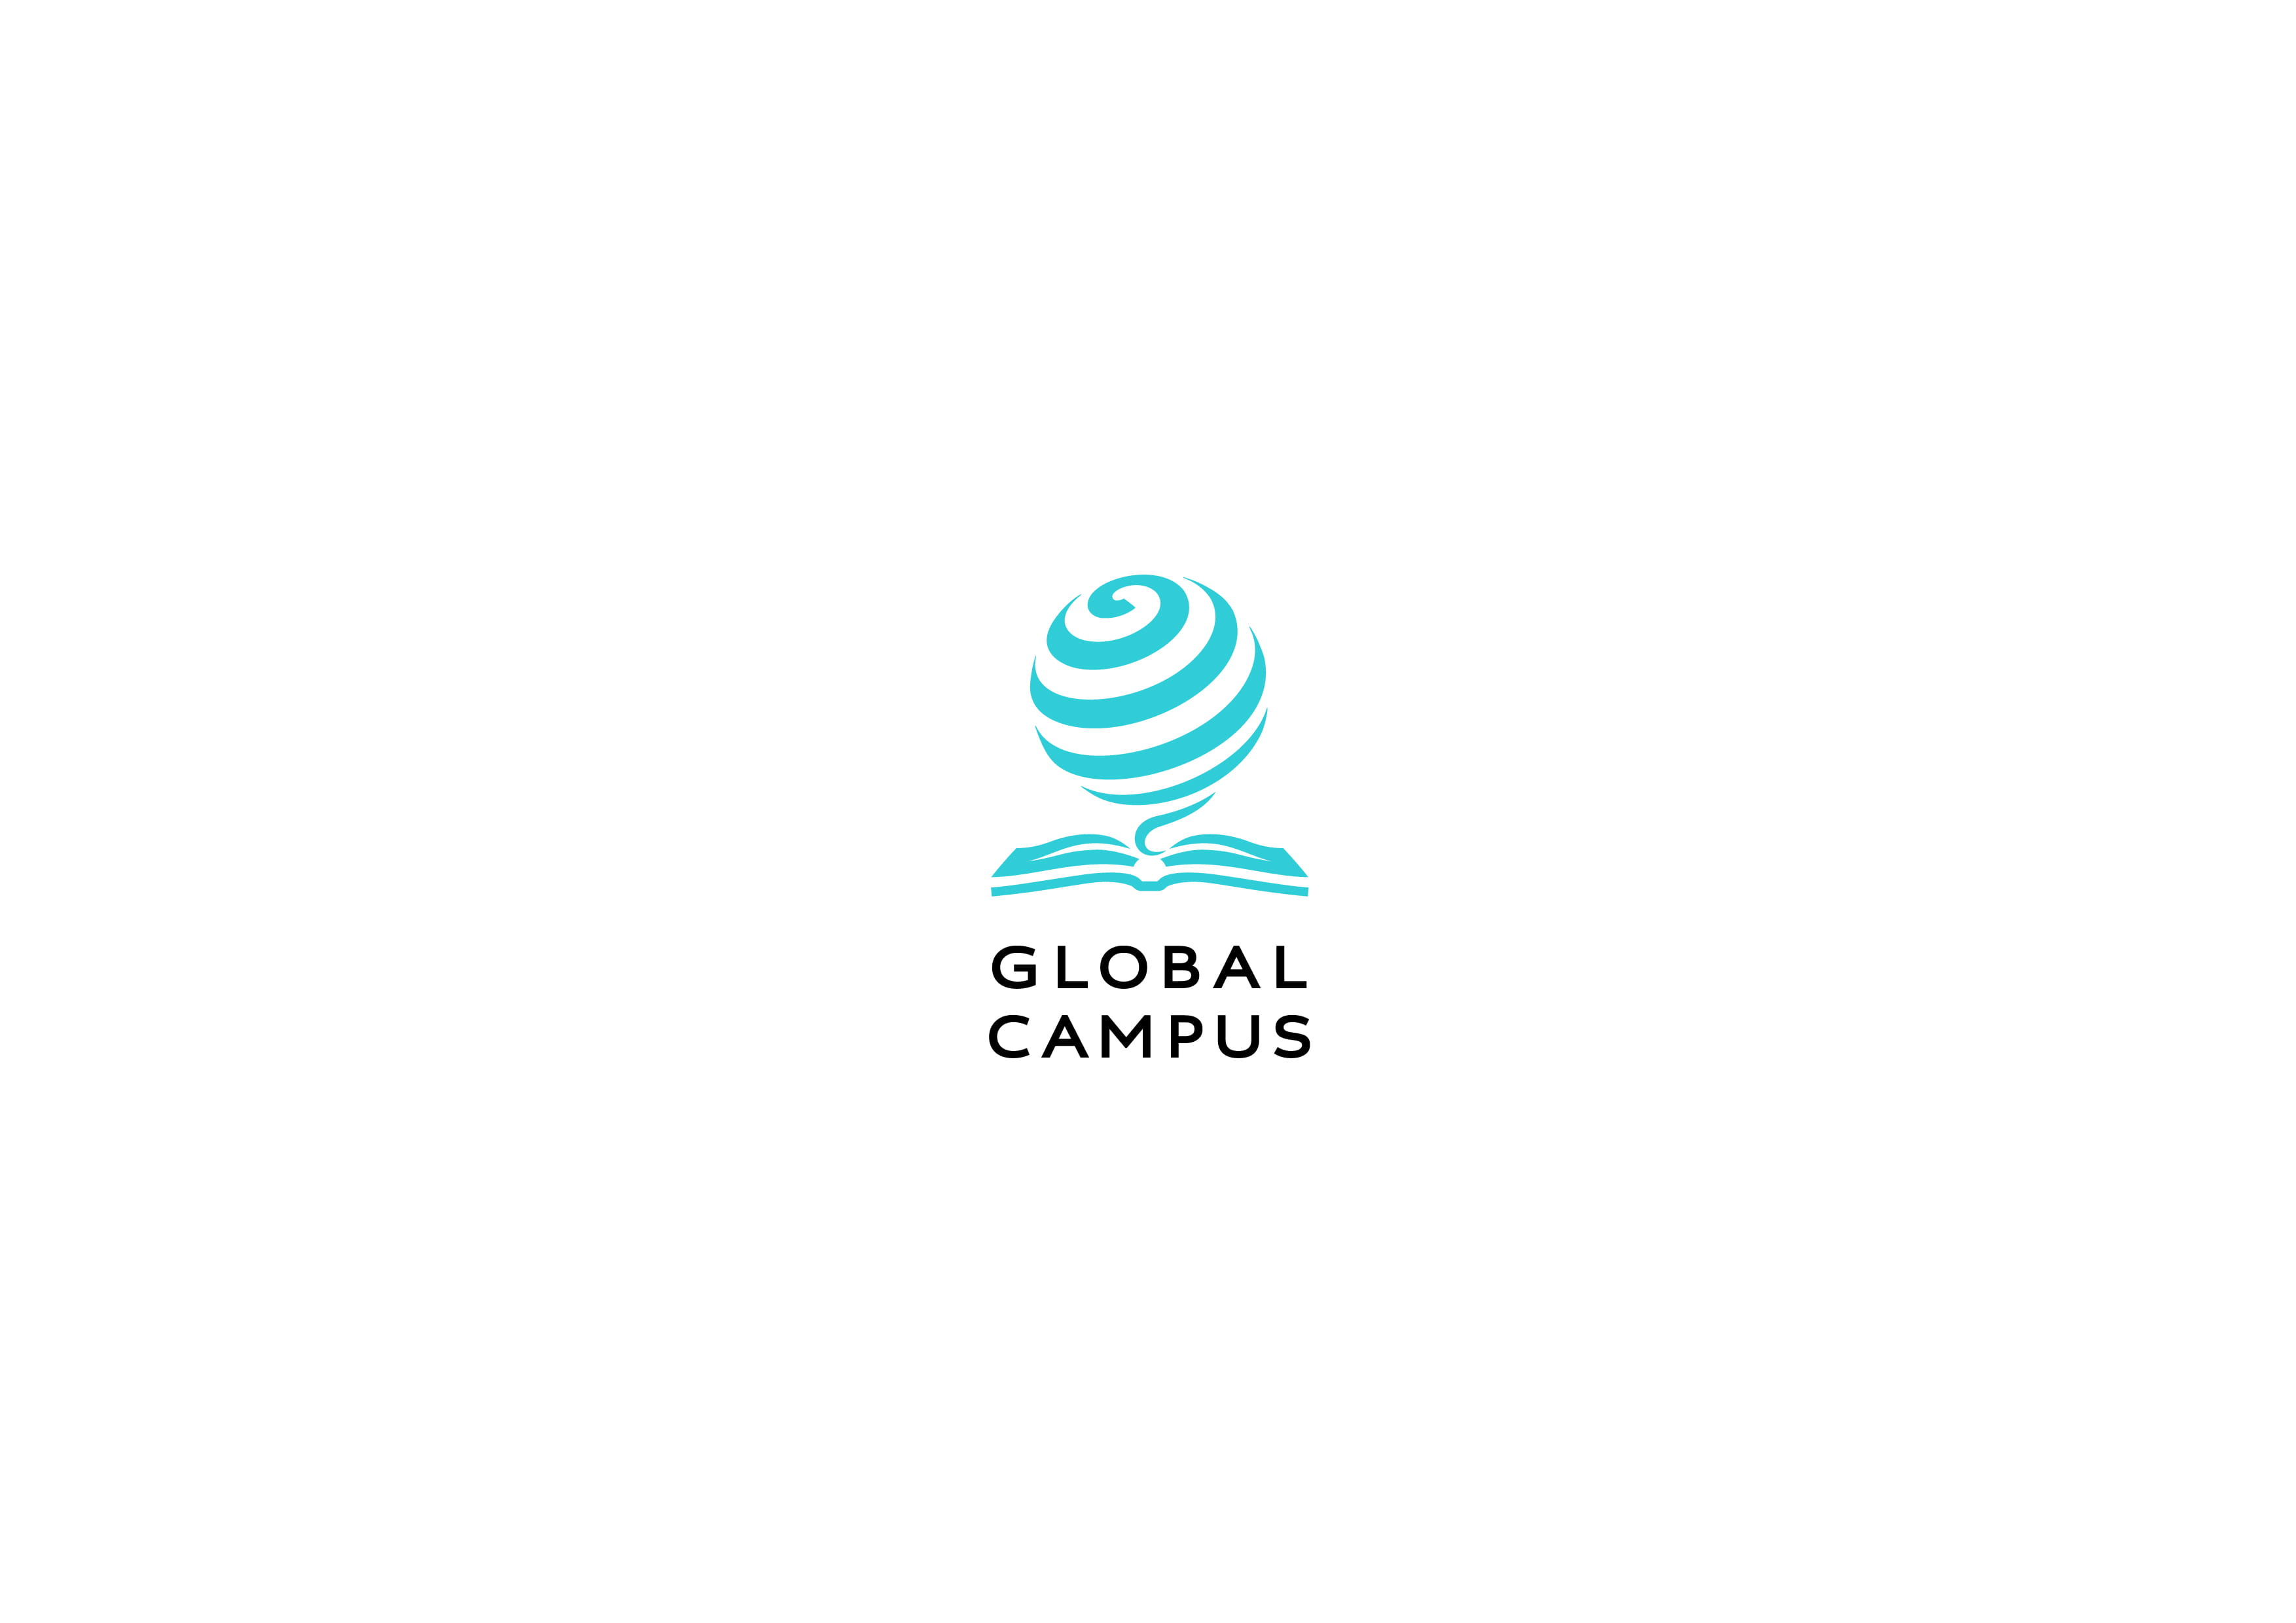 Global Campus provides exciting new events and opportunities for Northbridge students-global-campus-provides-exciting-new-events-and-opportunities-for-northbridge-students-Nord Anglia Education_Global Campus_Master Logo